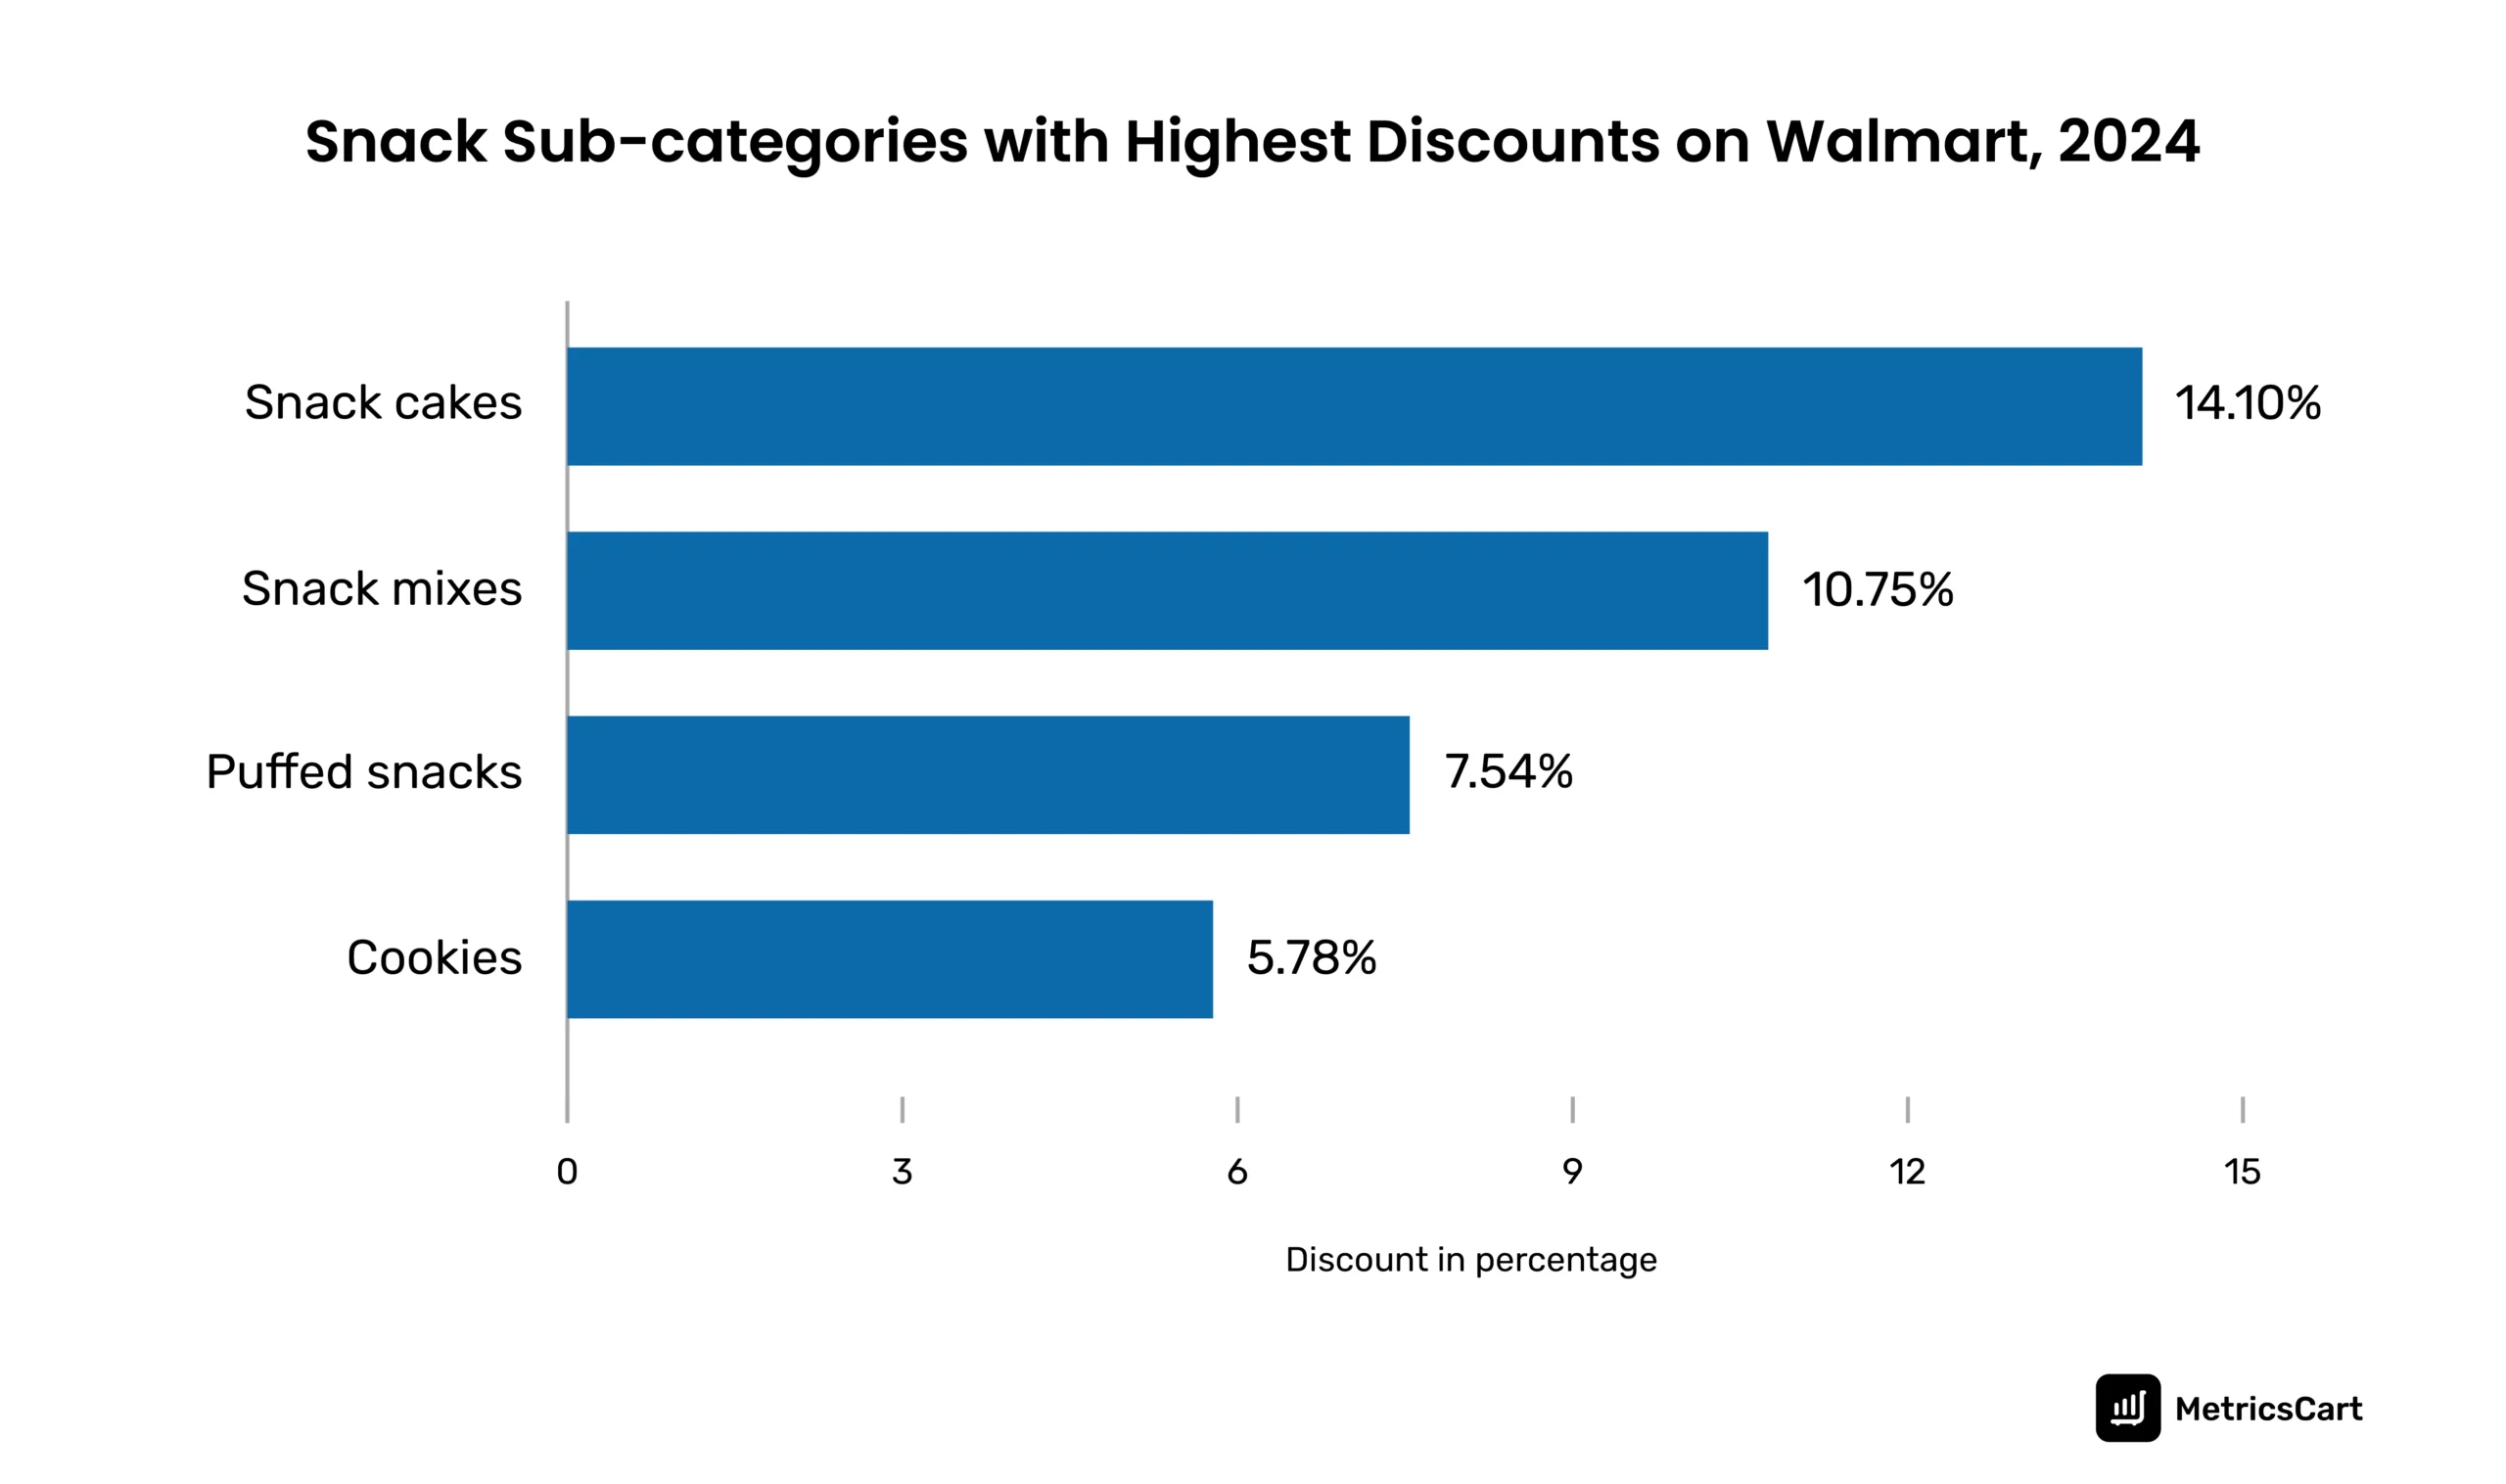 The chart shows the various snack subcategories with the highest discount on Walmart in 2024